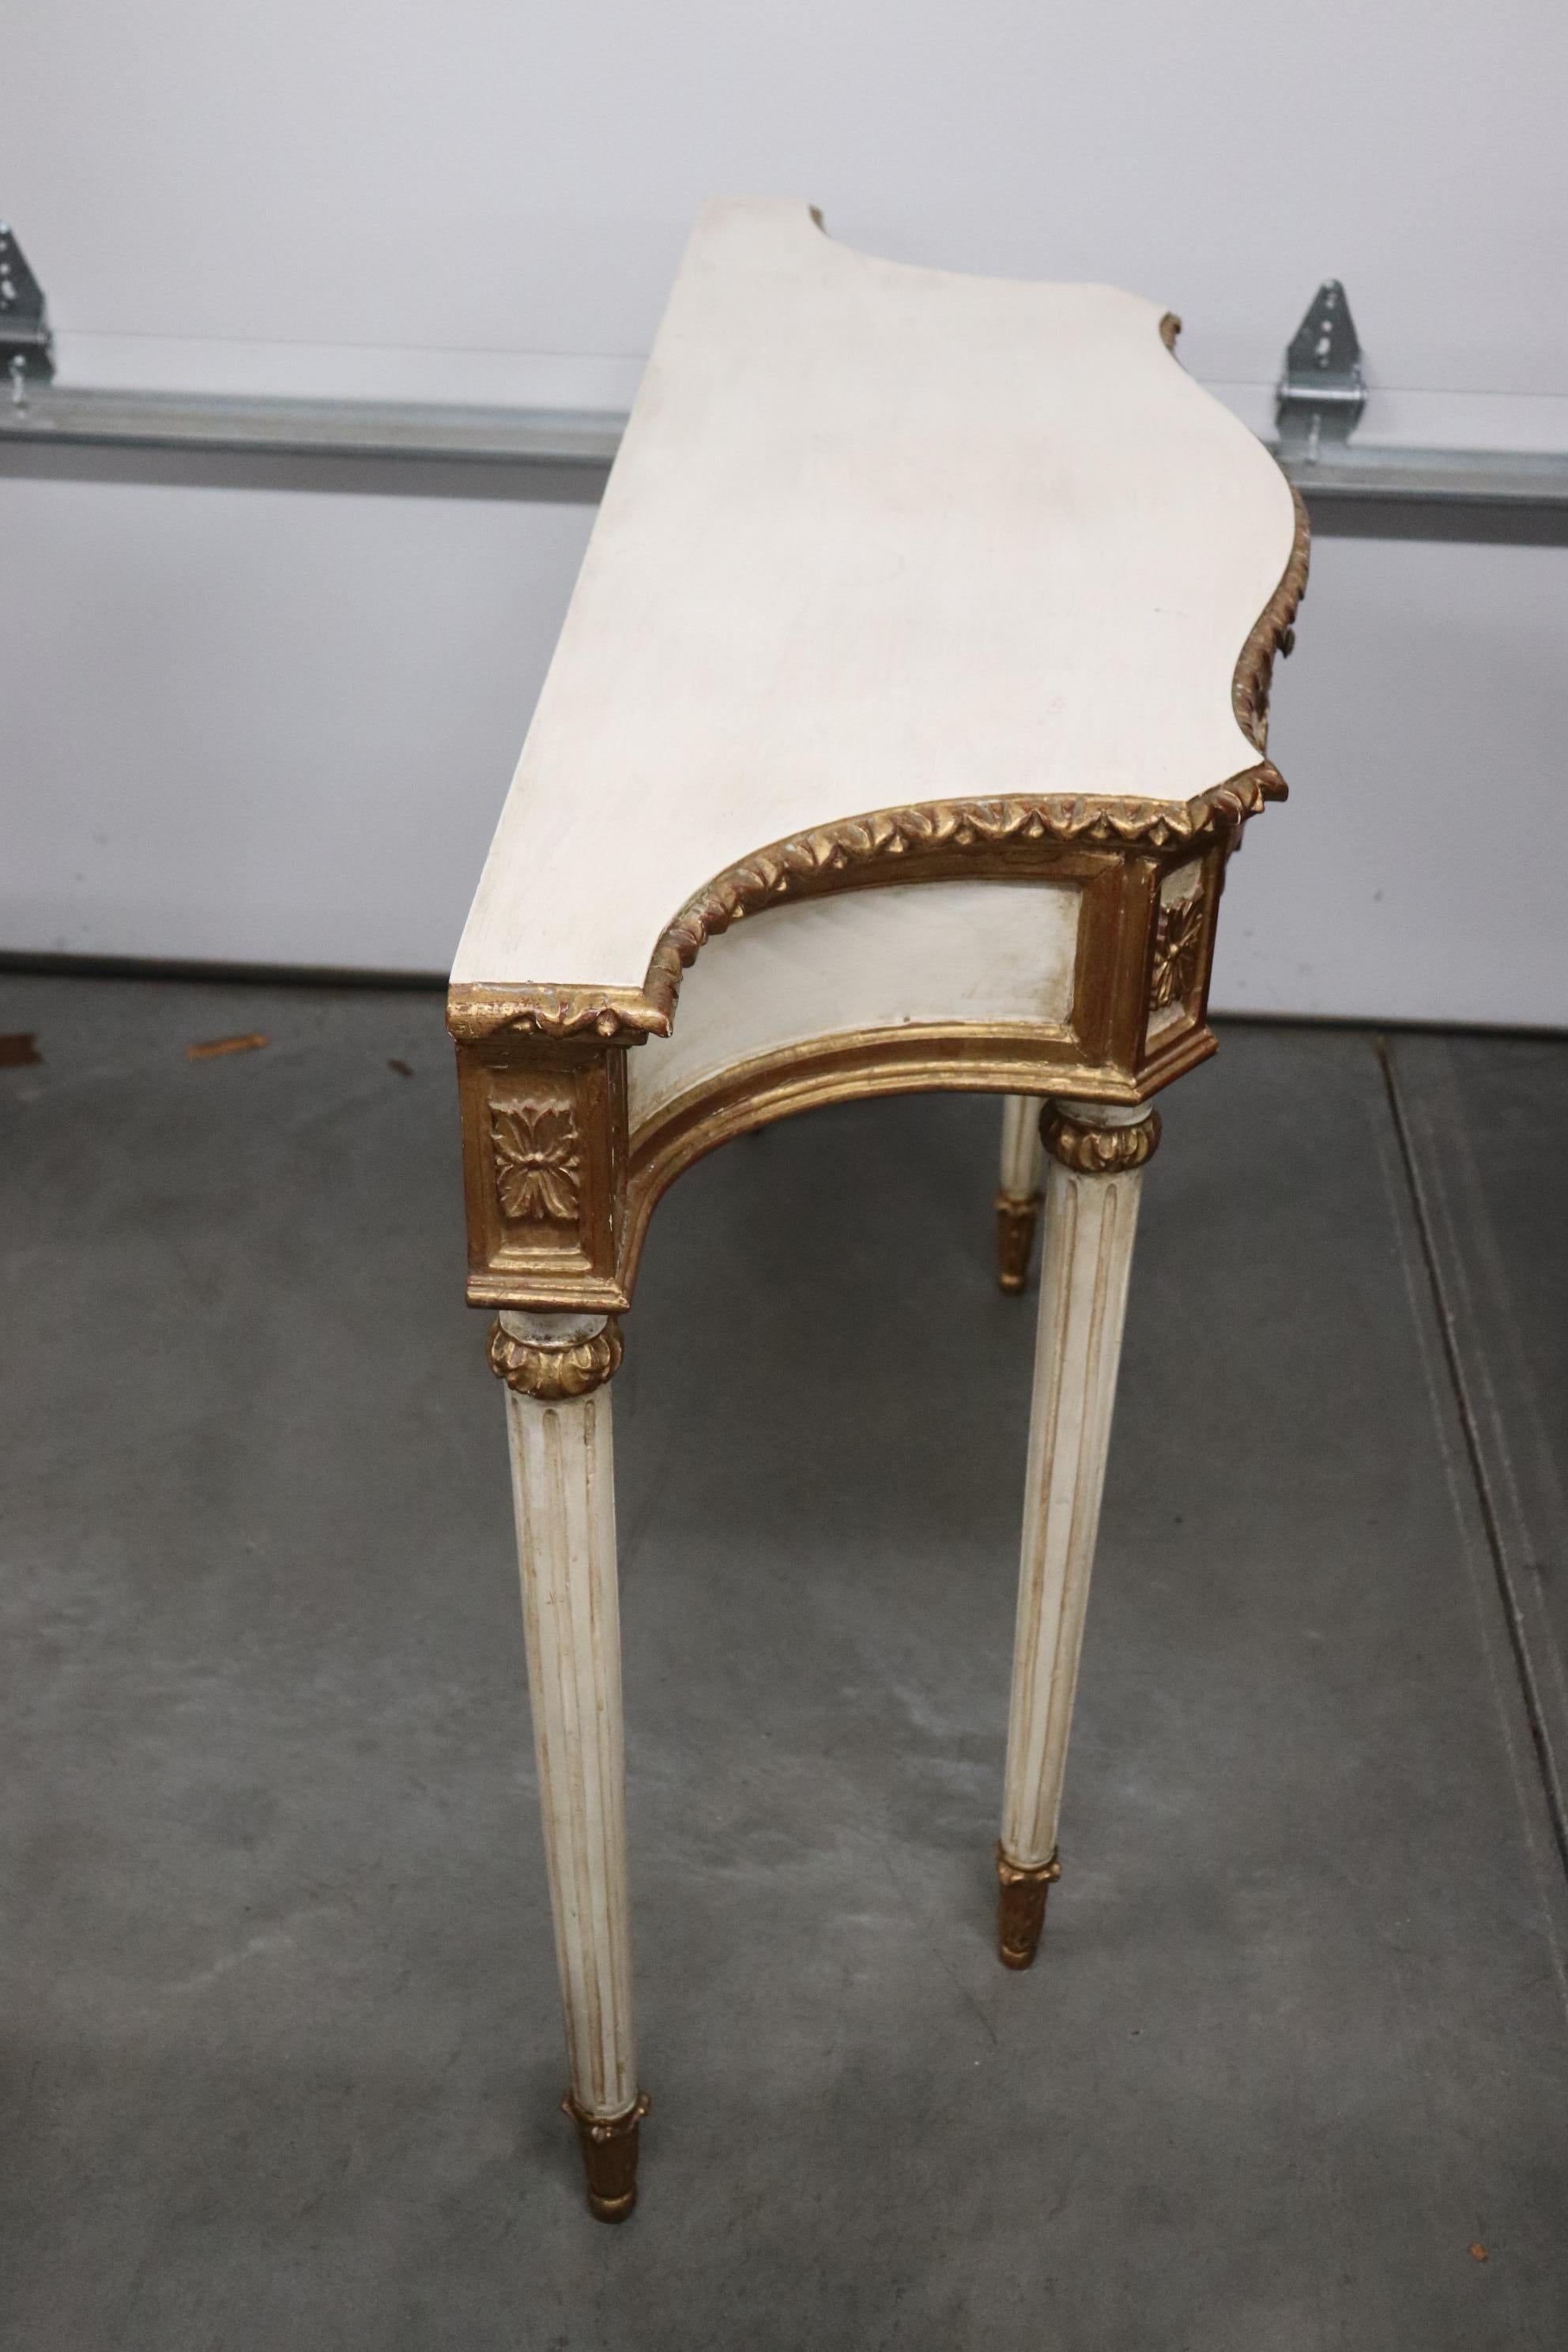 Antique White Painted and Gilded Florentine Italian Console Table, circa 1940s For Sale 3